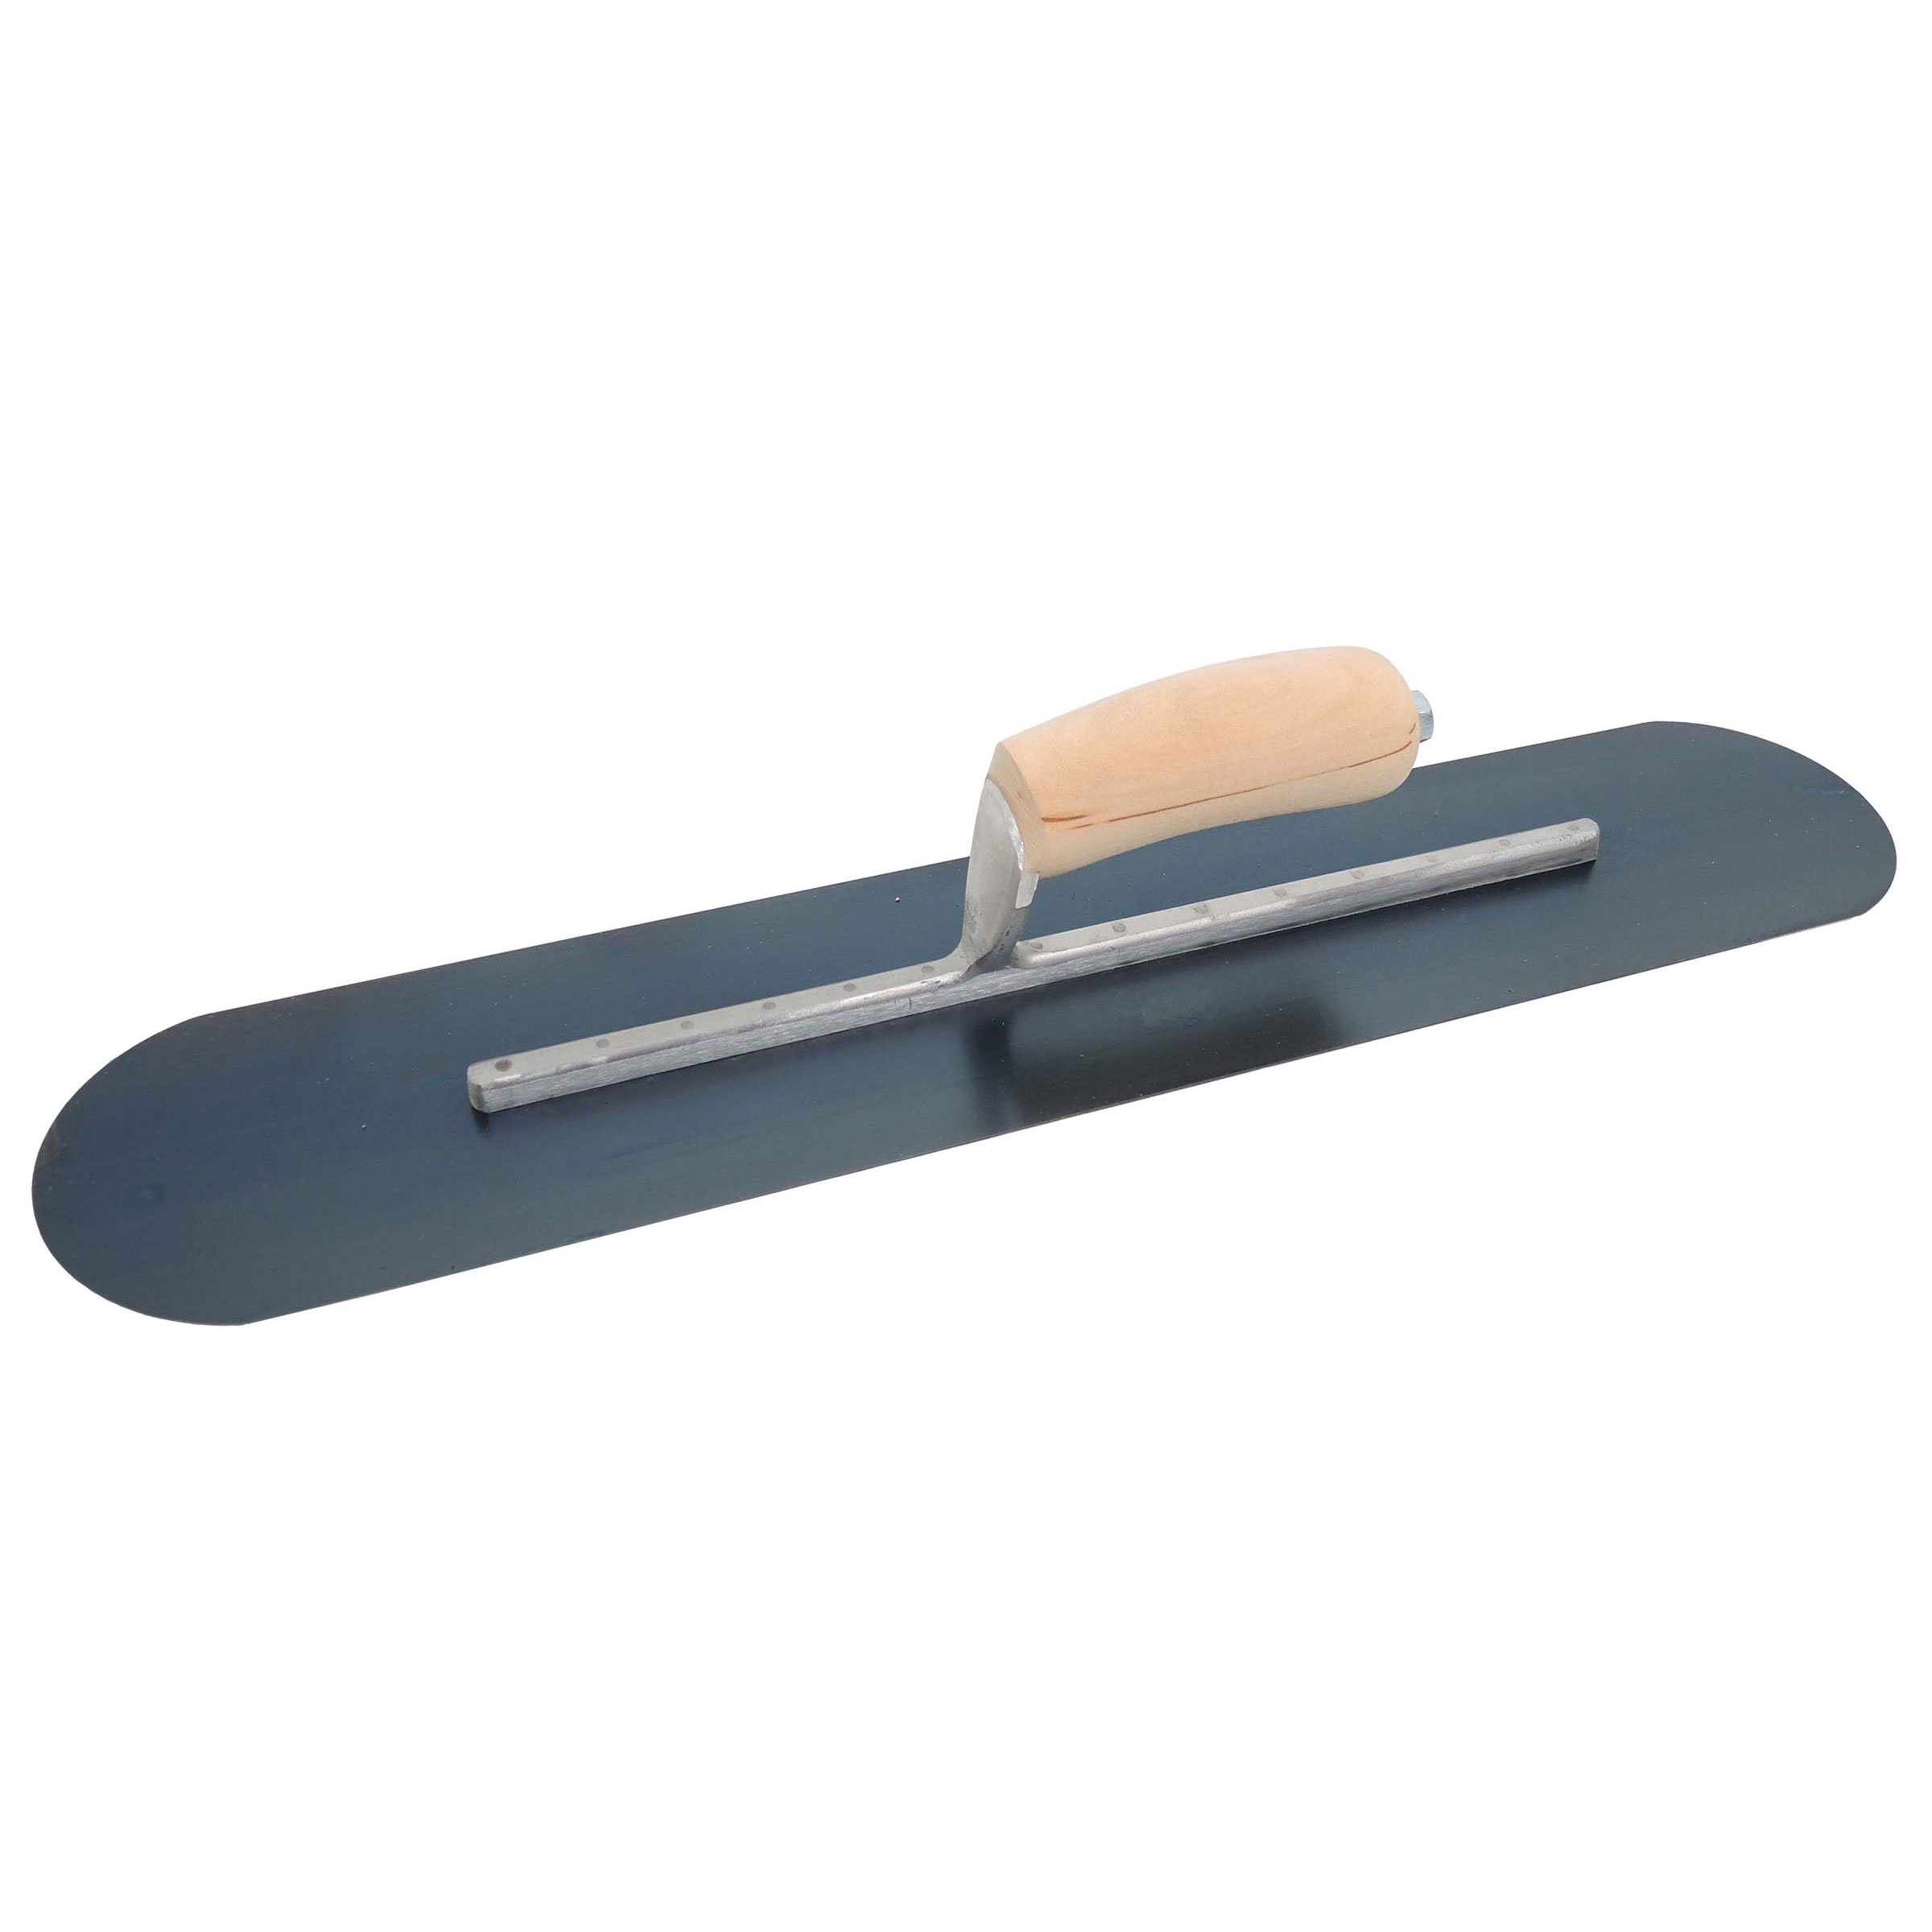 Marshalltown SP2245BR14 22in x 4-1/2in Fully Rounded Trowel with Exposed Rivet Trowels and Wood Handle SP2245BR14